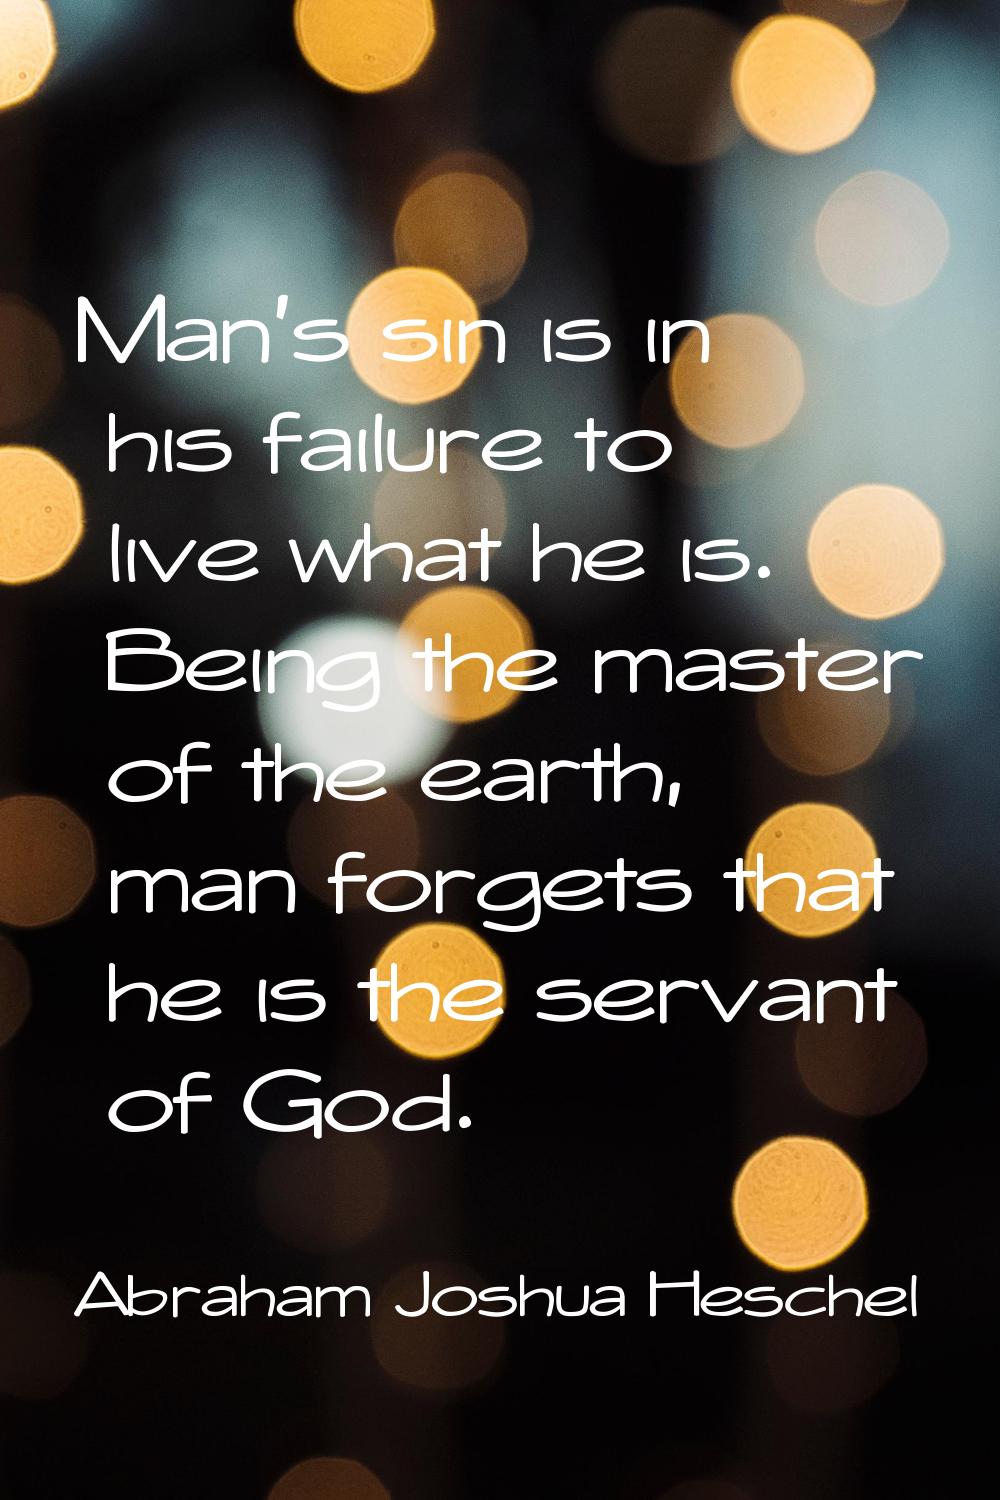 Man's sin is in his failure to live what he is. Being the master of the earth, man forgets that he 